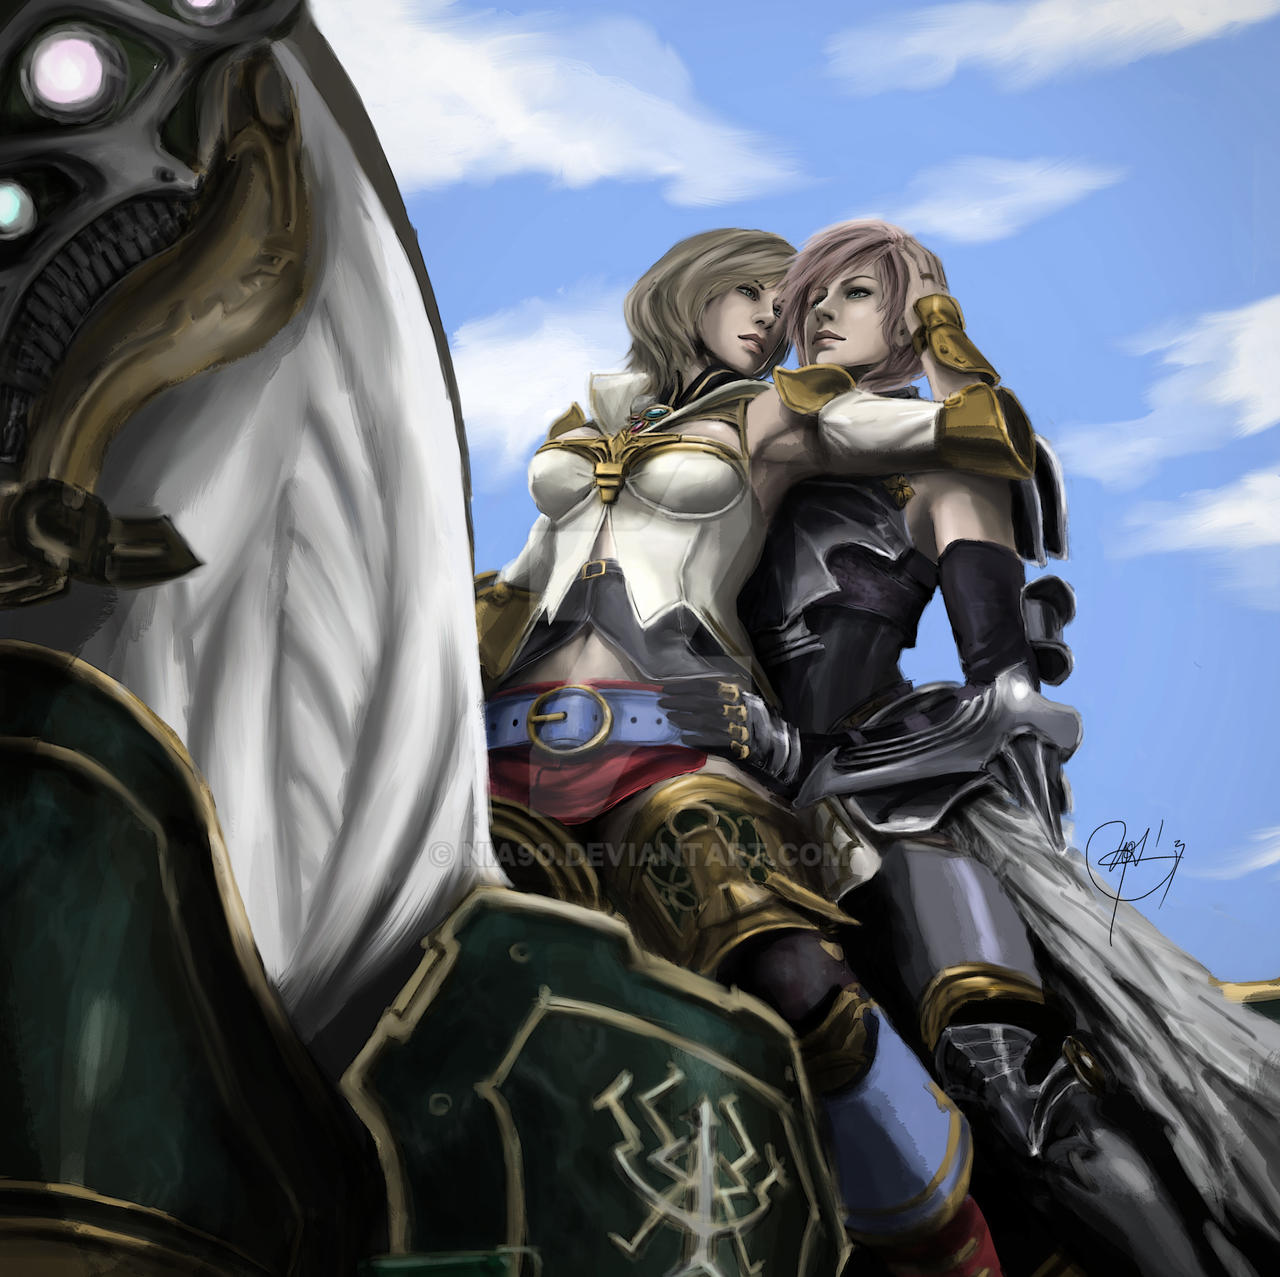 Princess and Knight by Nia90 on DeviantArt